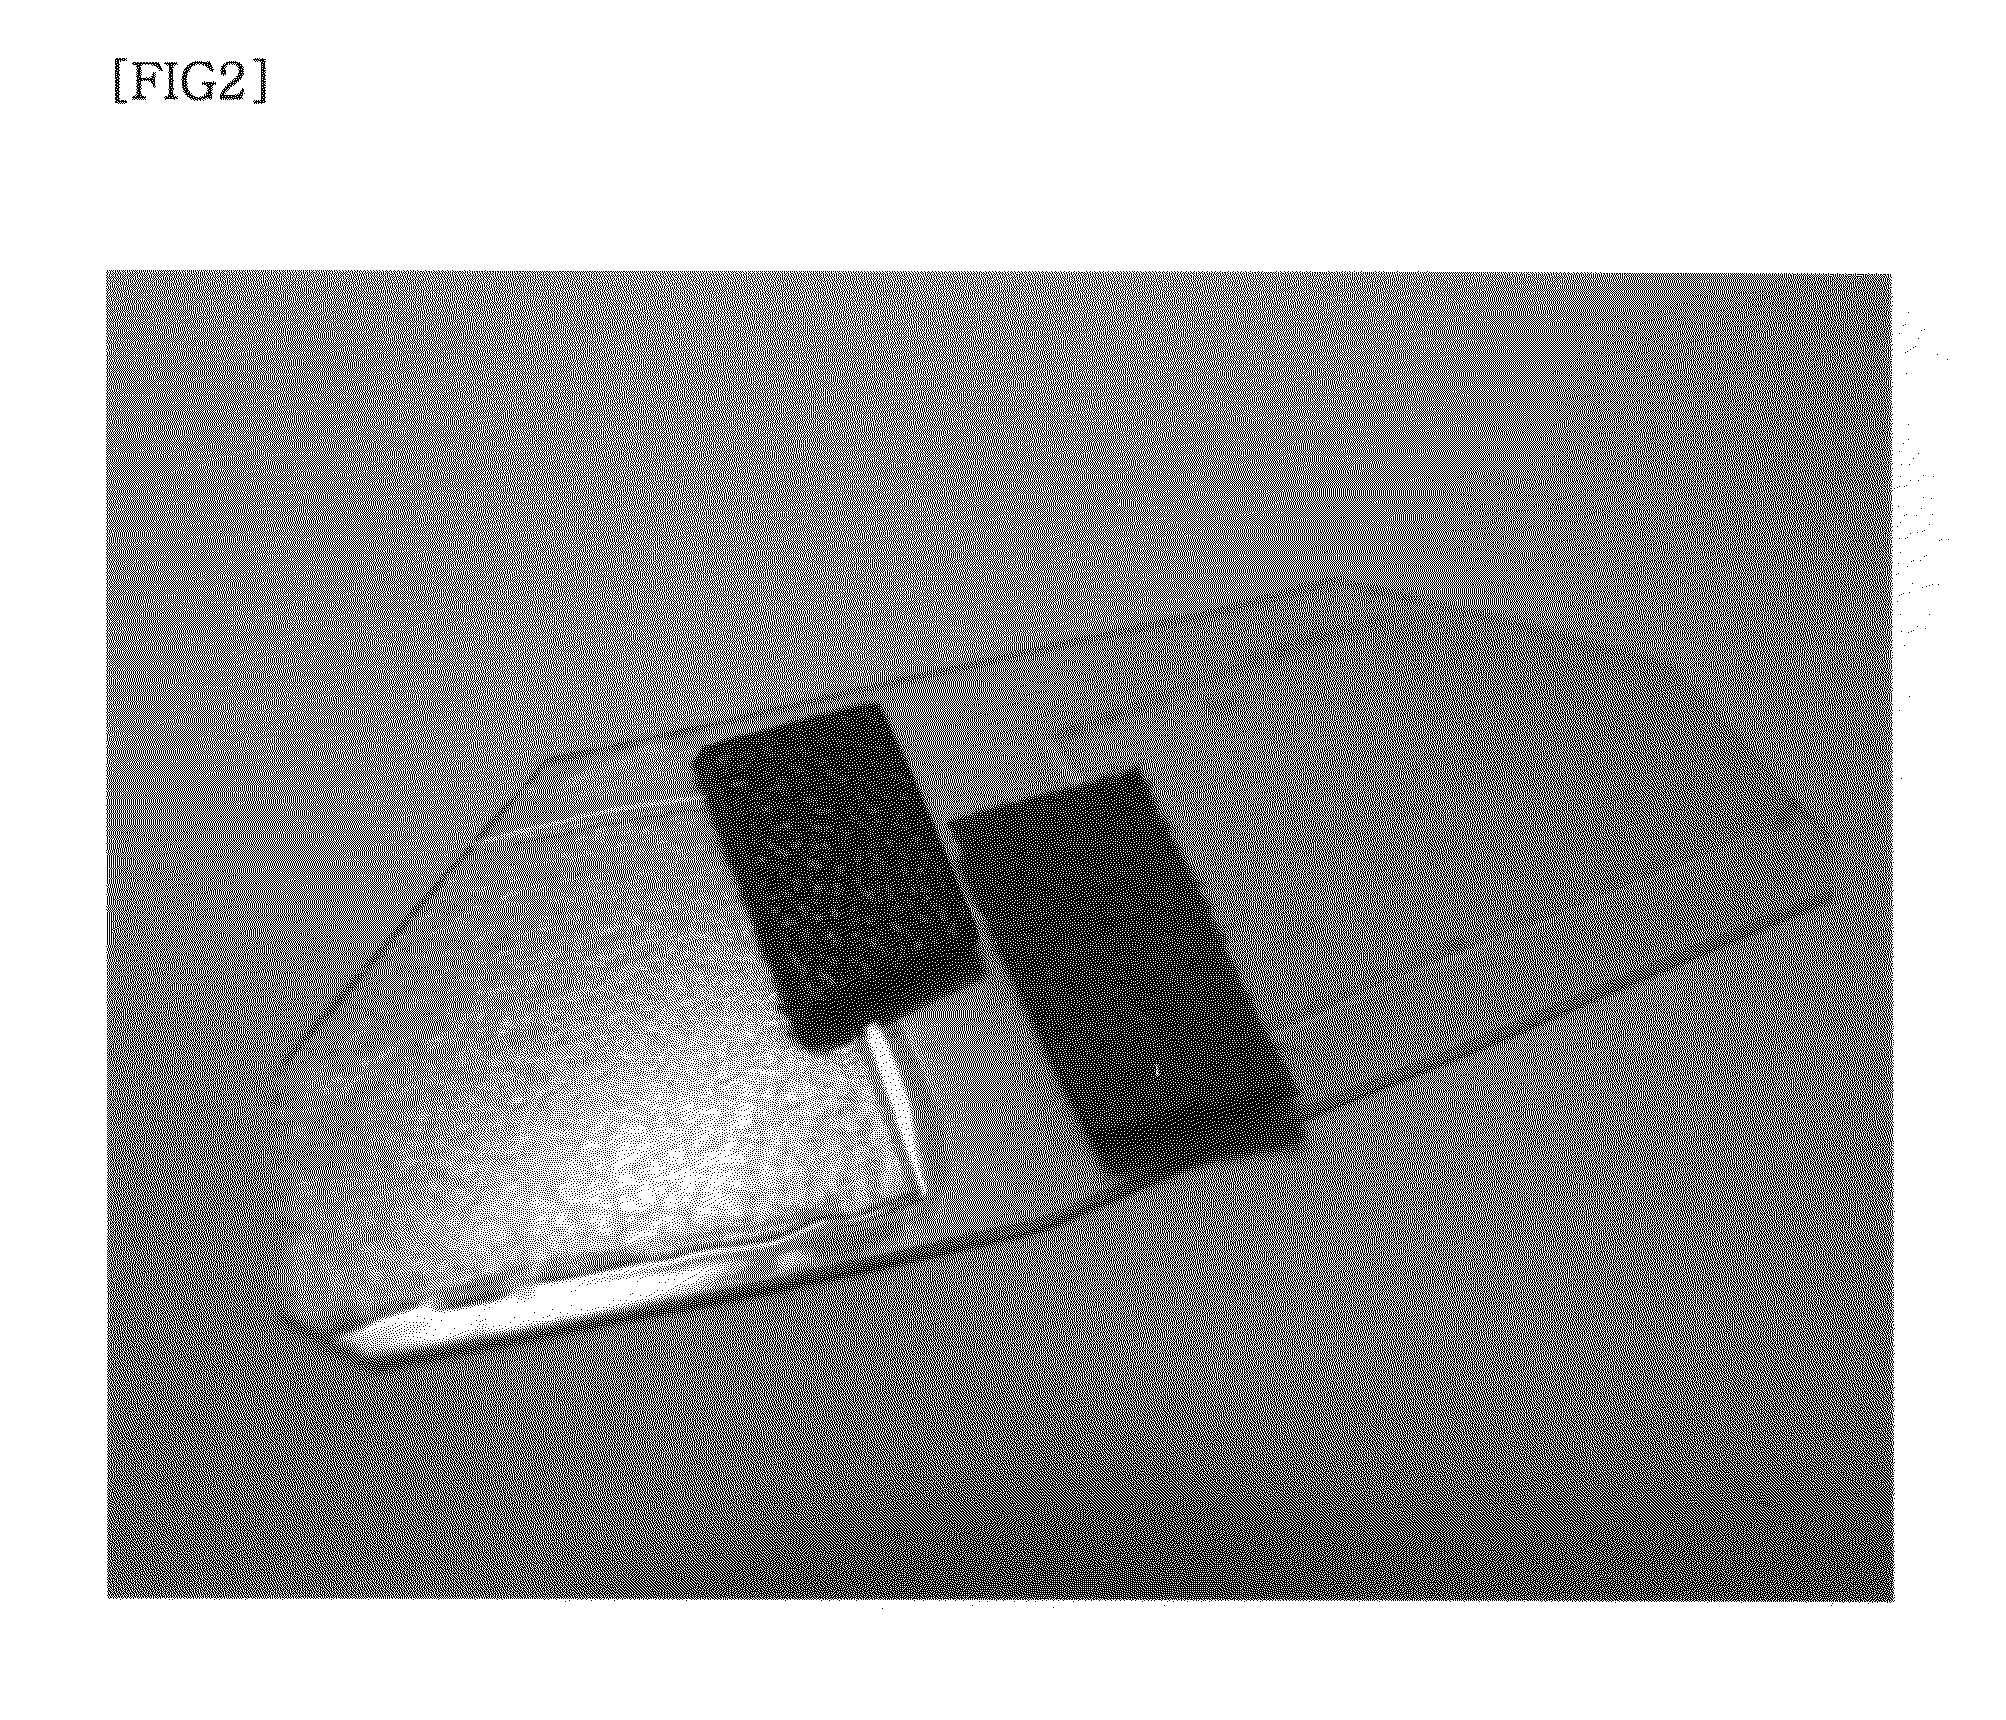 Method of duplicating nano pattern texture on object's surface by nano imprinting and electroforming